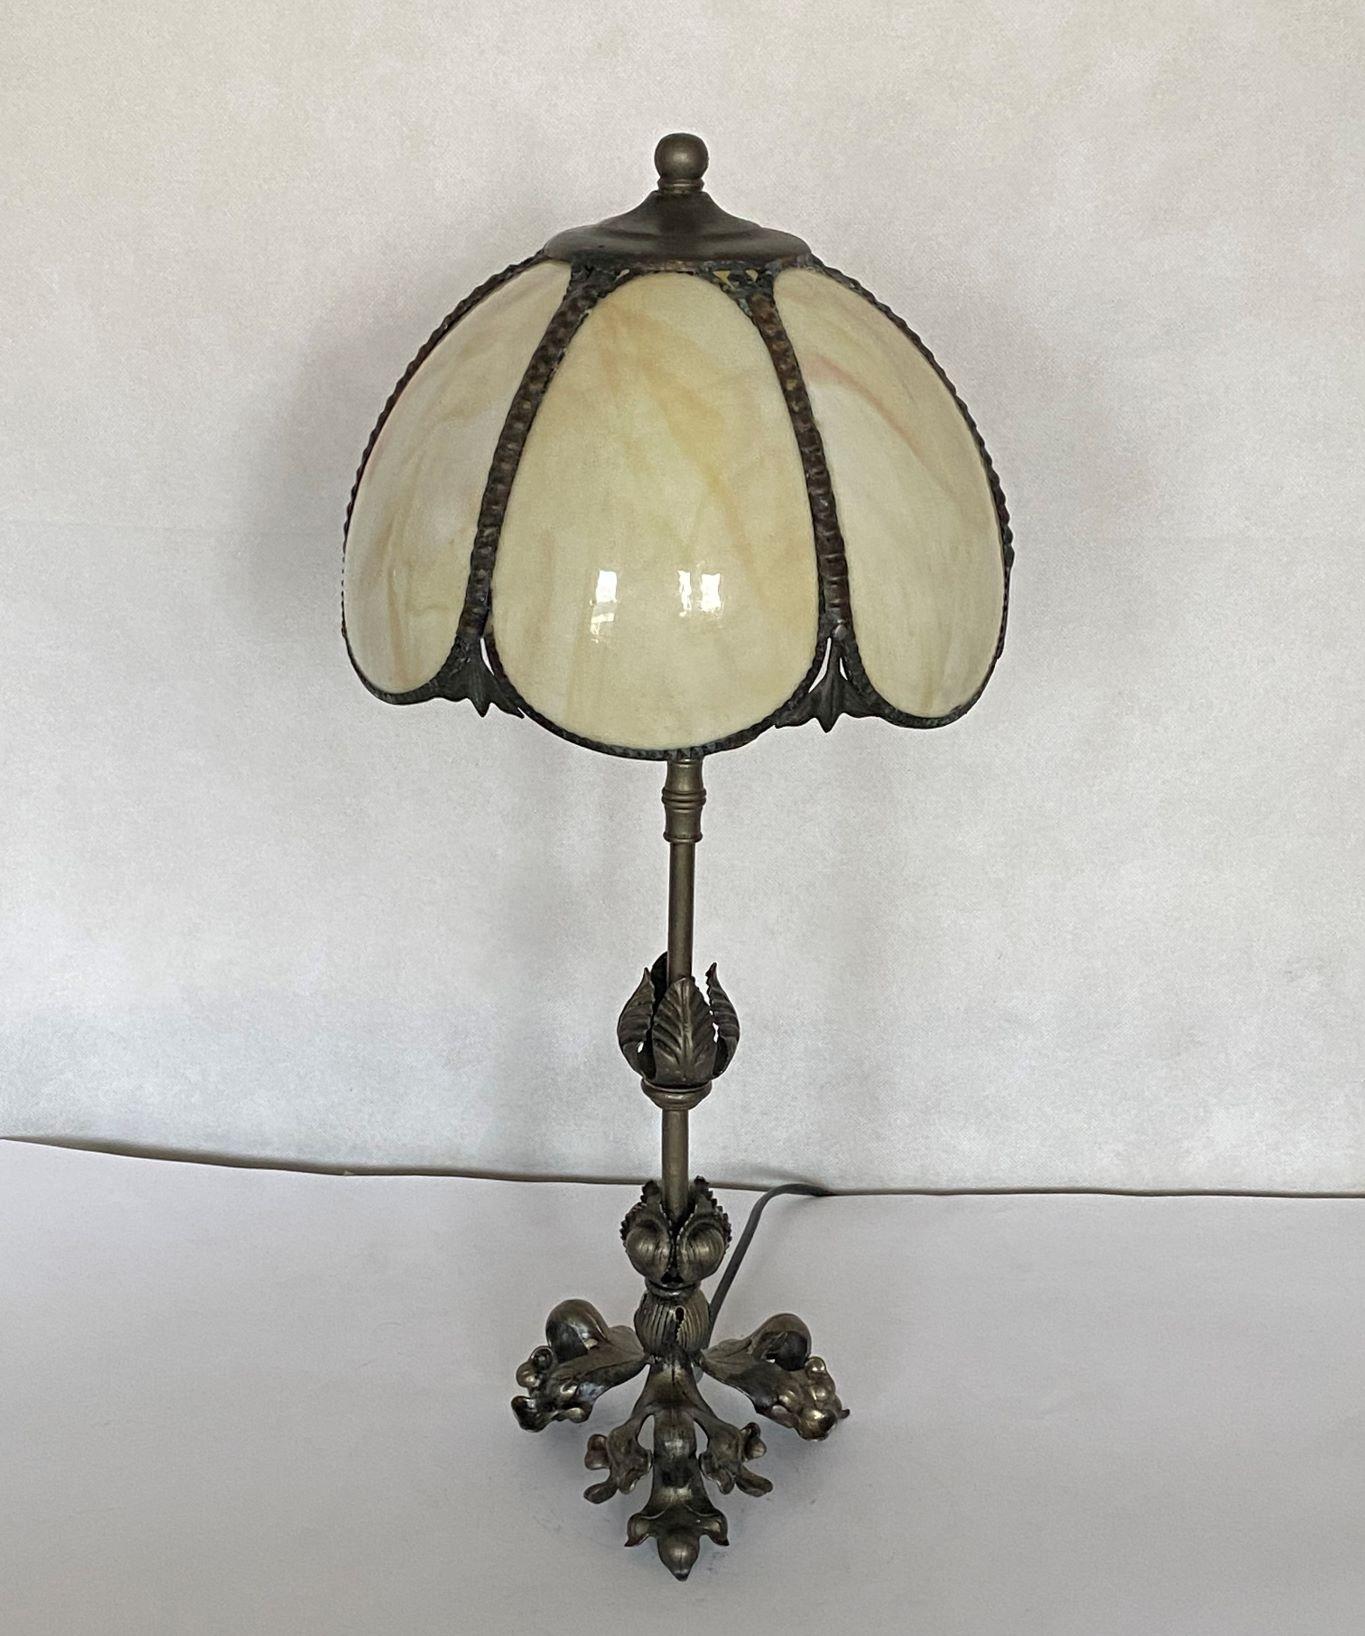 A tall, elegant French Art Deco table lamp from the 1930s. Dome form shade with six bent slag glass panels beautifuly connected with brass, providing a warm, pleasant lighting, on a foliate tripod patinated wrought base. The table lamp is in fine